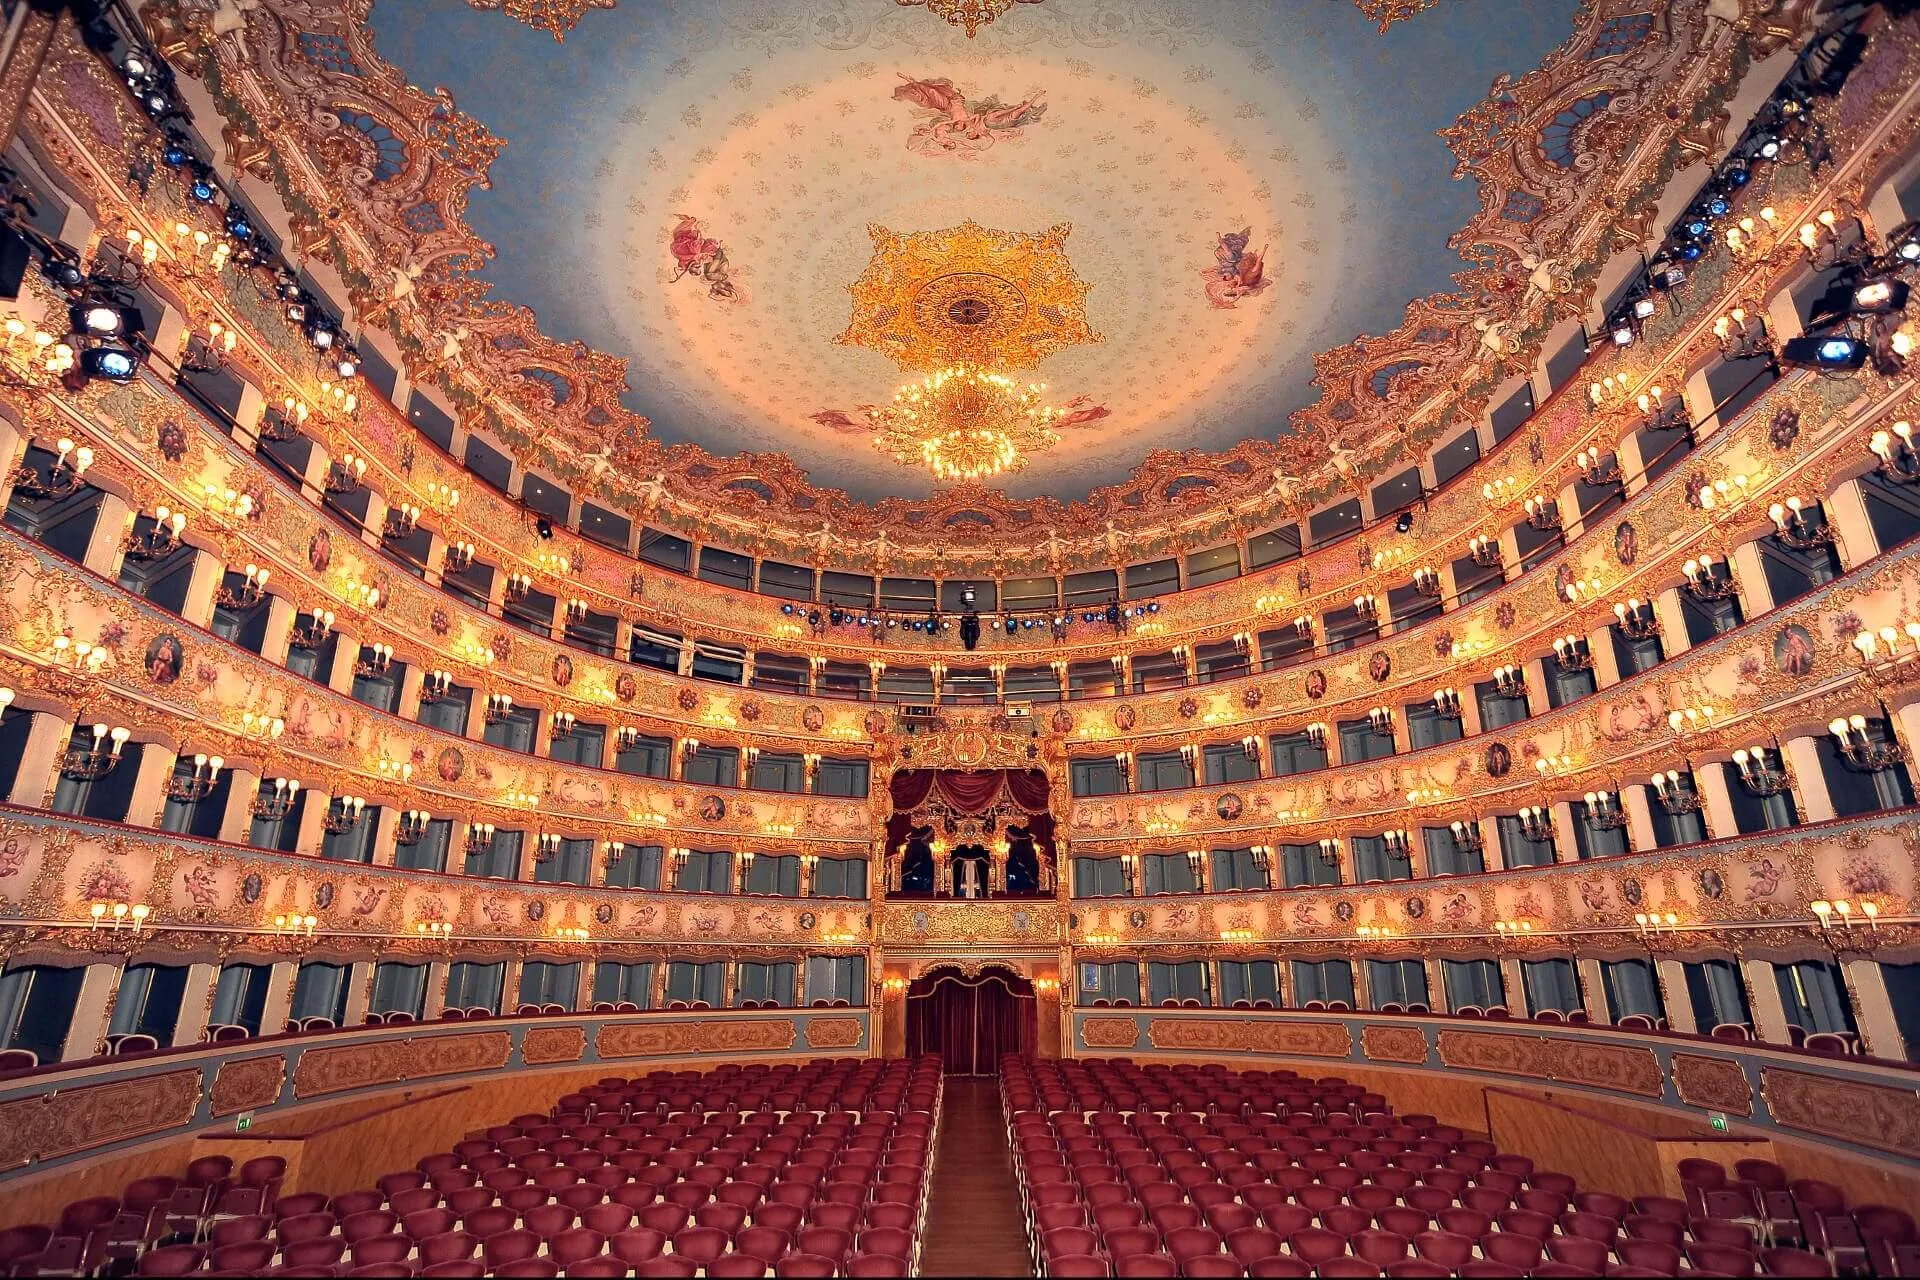 La Fenice in Italy, Europe | Opera Houses - Rated 4.2